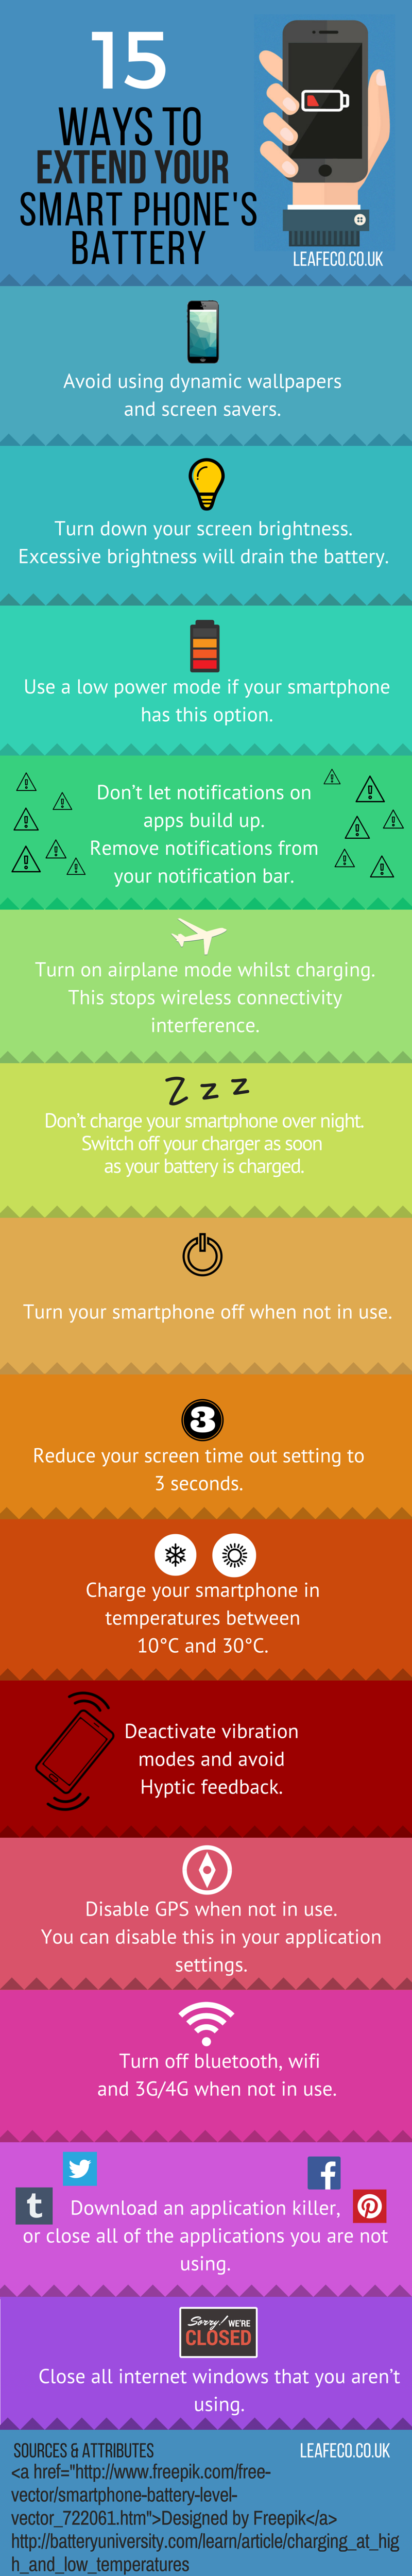 Infographic explaining for to extend the battery life on a smartphone